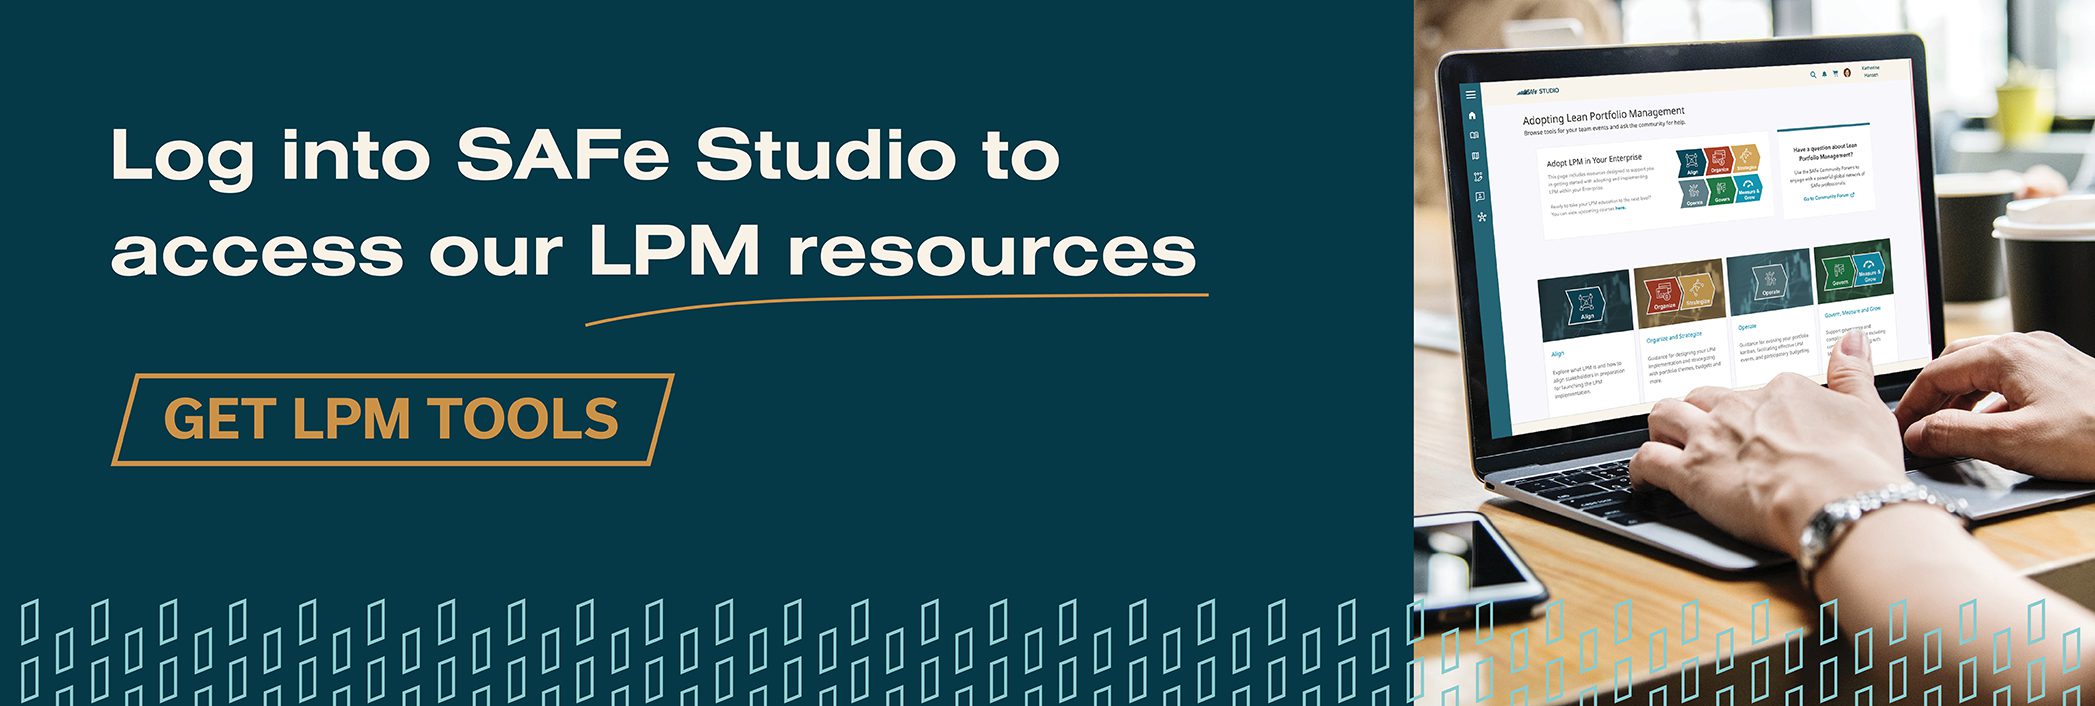 Log into SAFe Studio to access our LPM resources

GET LPM TOOLS